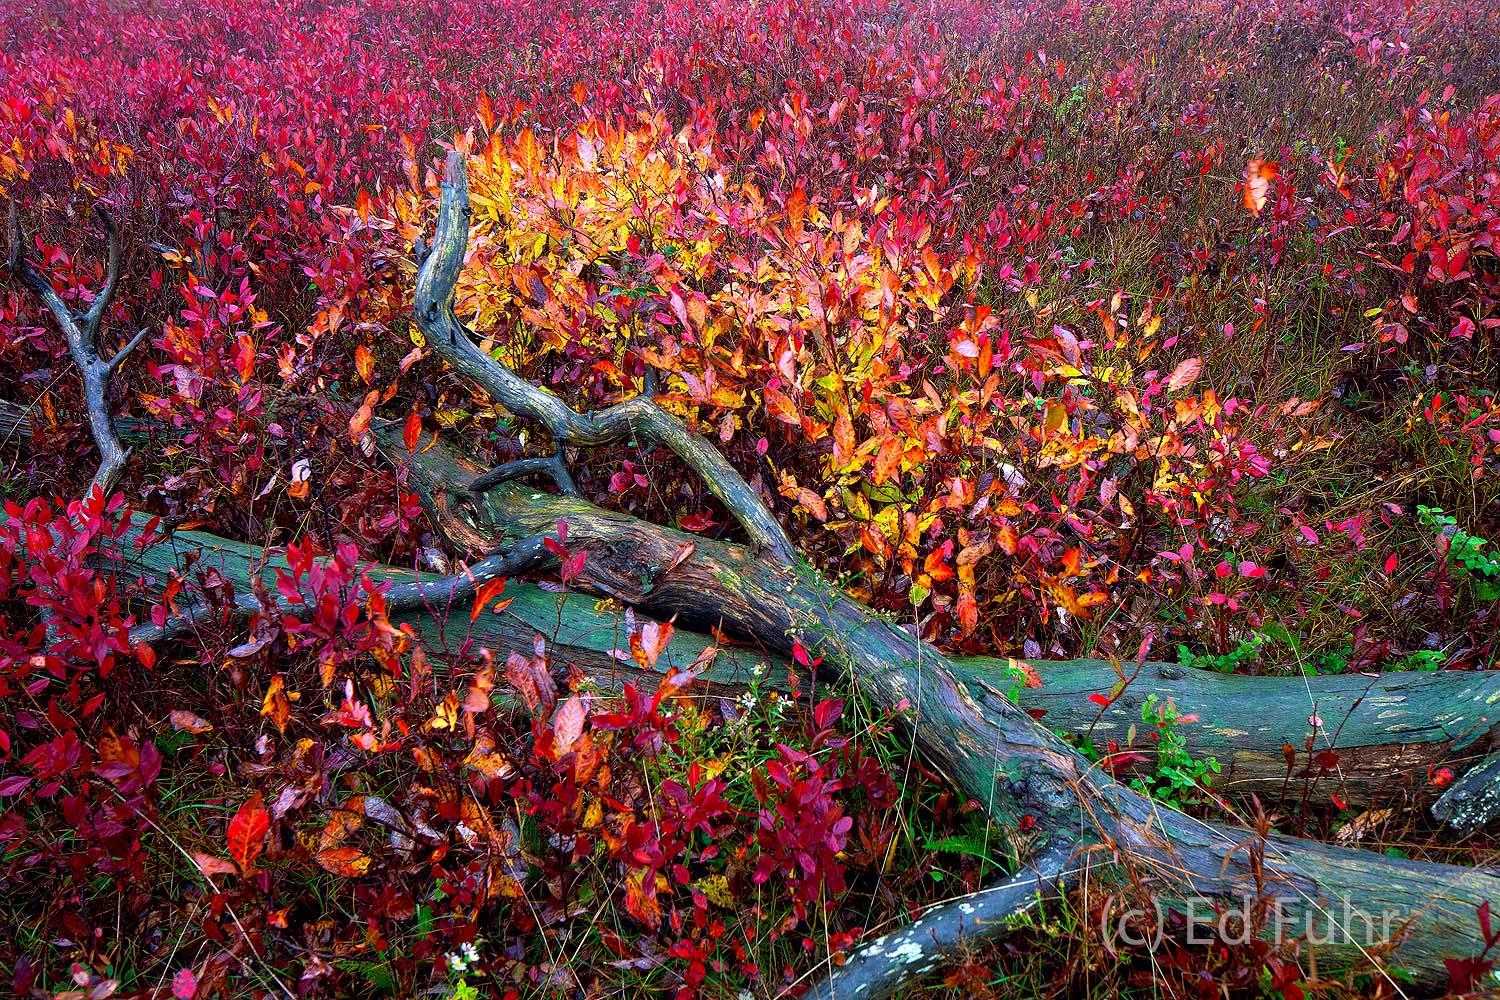 A fallen tree decays slowly among the berry bushes that color Big Meadows in autumn.